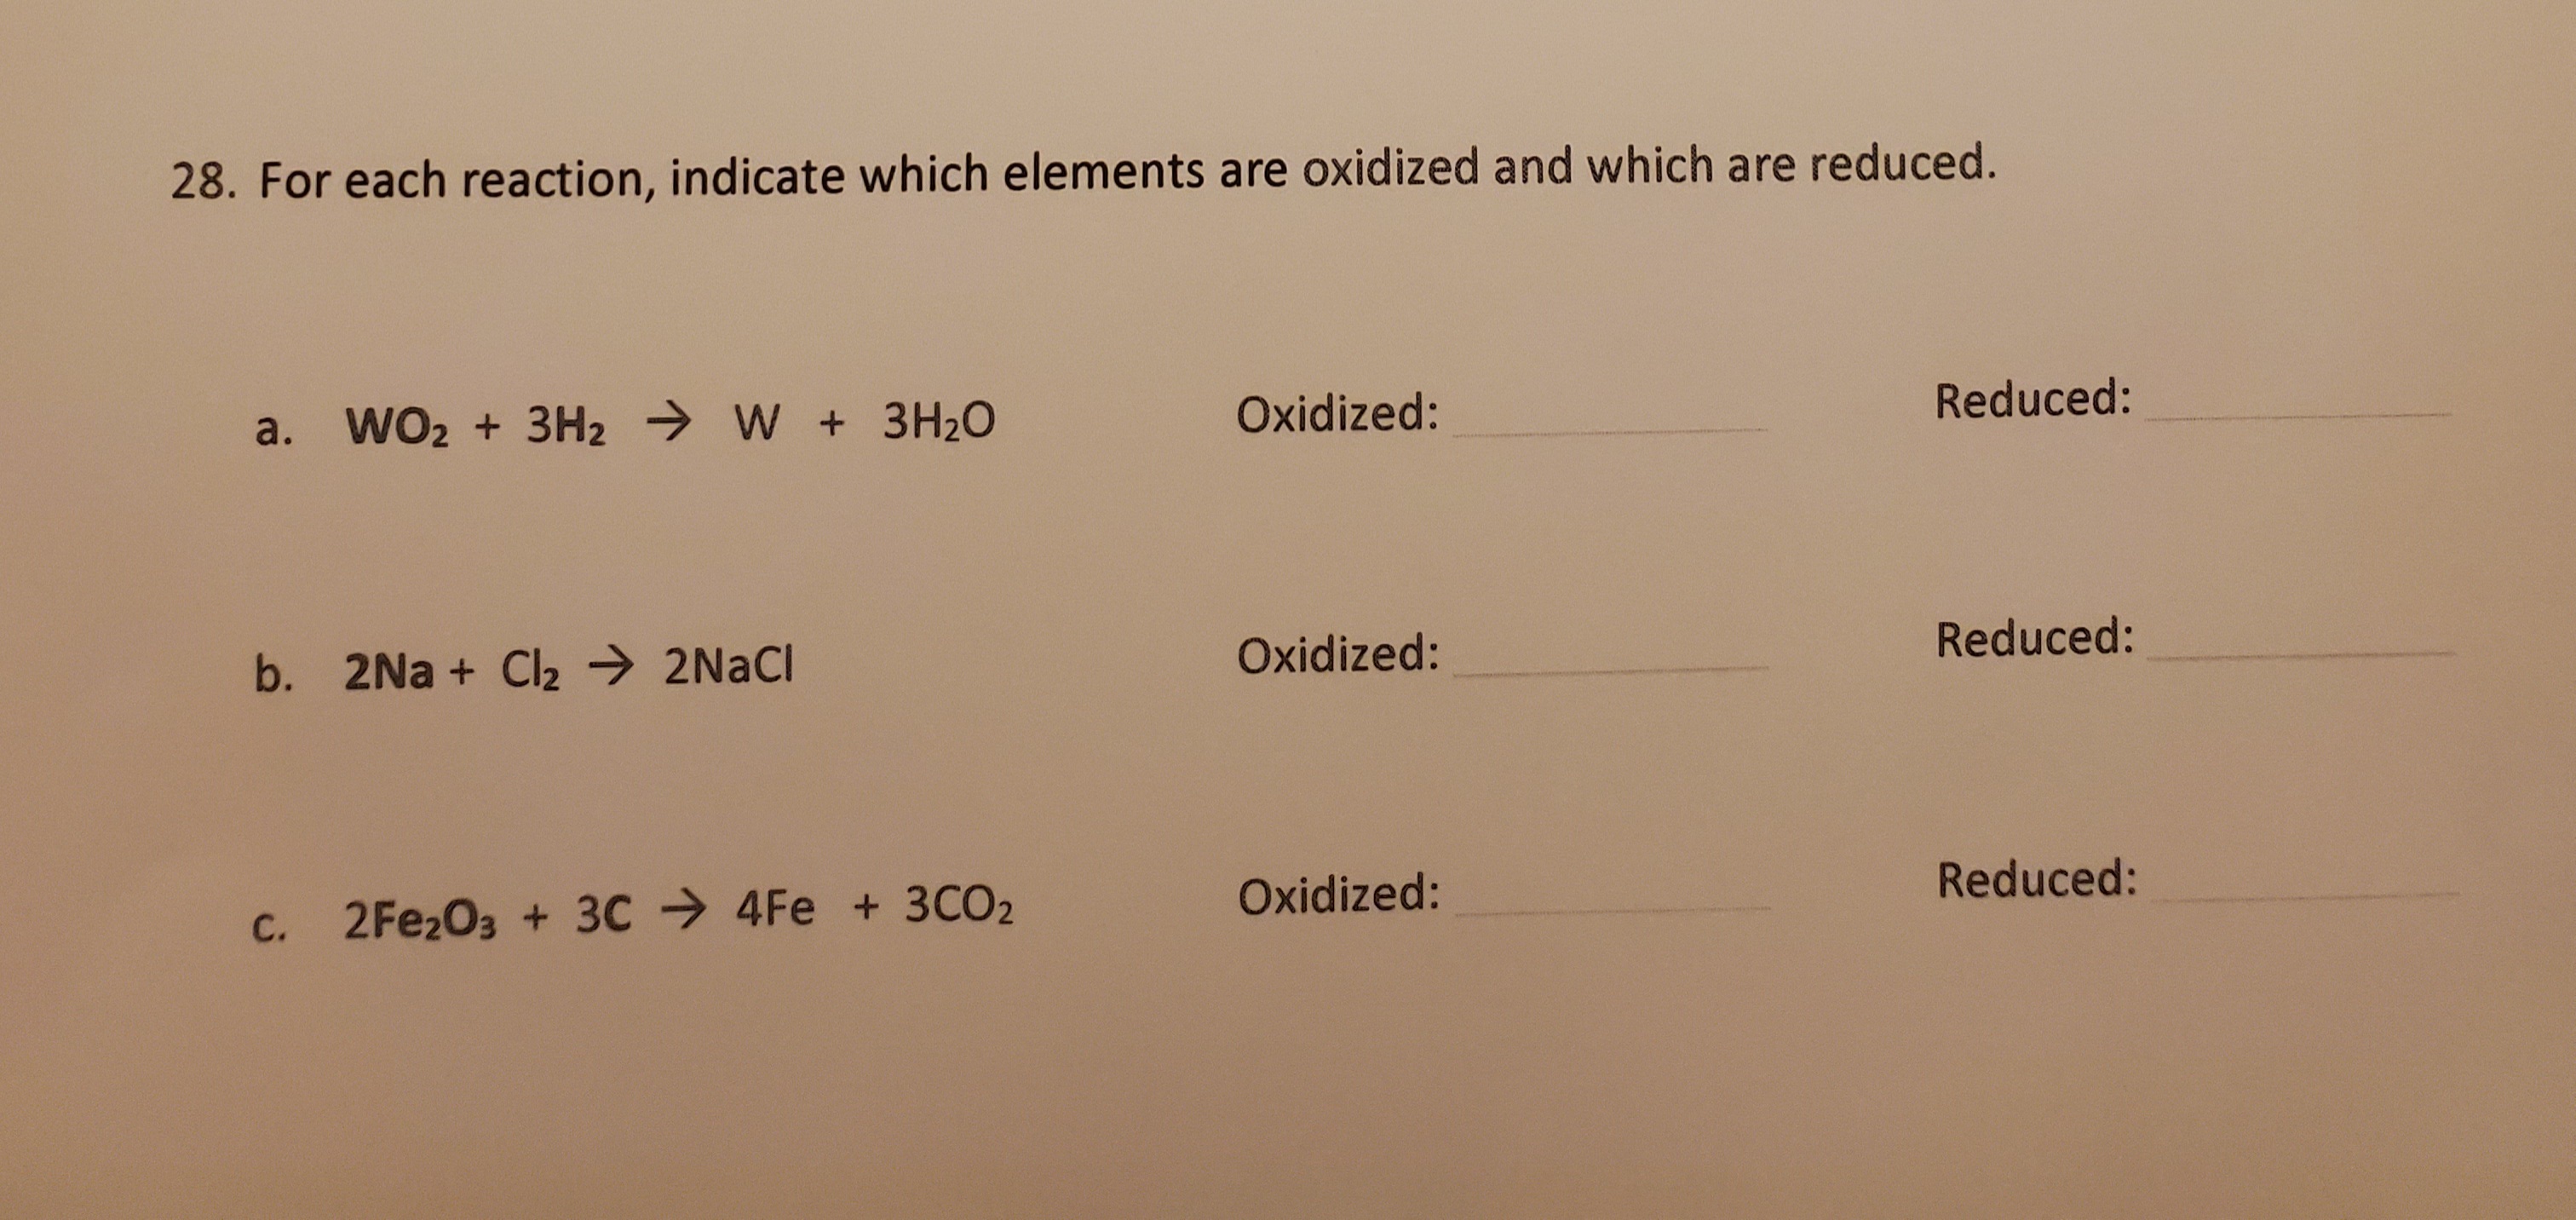 For each reaction, indicate which elements are oxidized and which are reduced.
a. WO2 + 3H2 → W + 3H20
Oxidized:
Reduced:
b. 2Na + Cl2 → 2NACI
Oxidized:
Reduced:
C. 2 Fe2O3 + 3C 4Fe + 3CO2
Oxidized:
Reduced:
